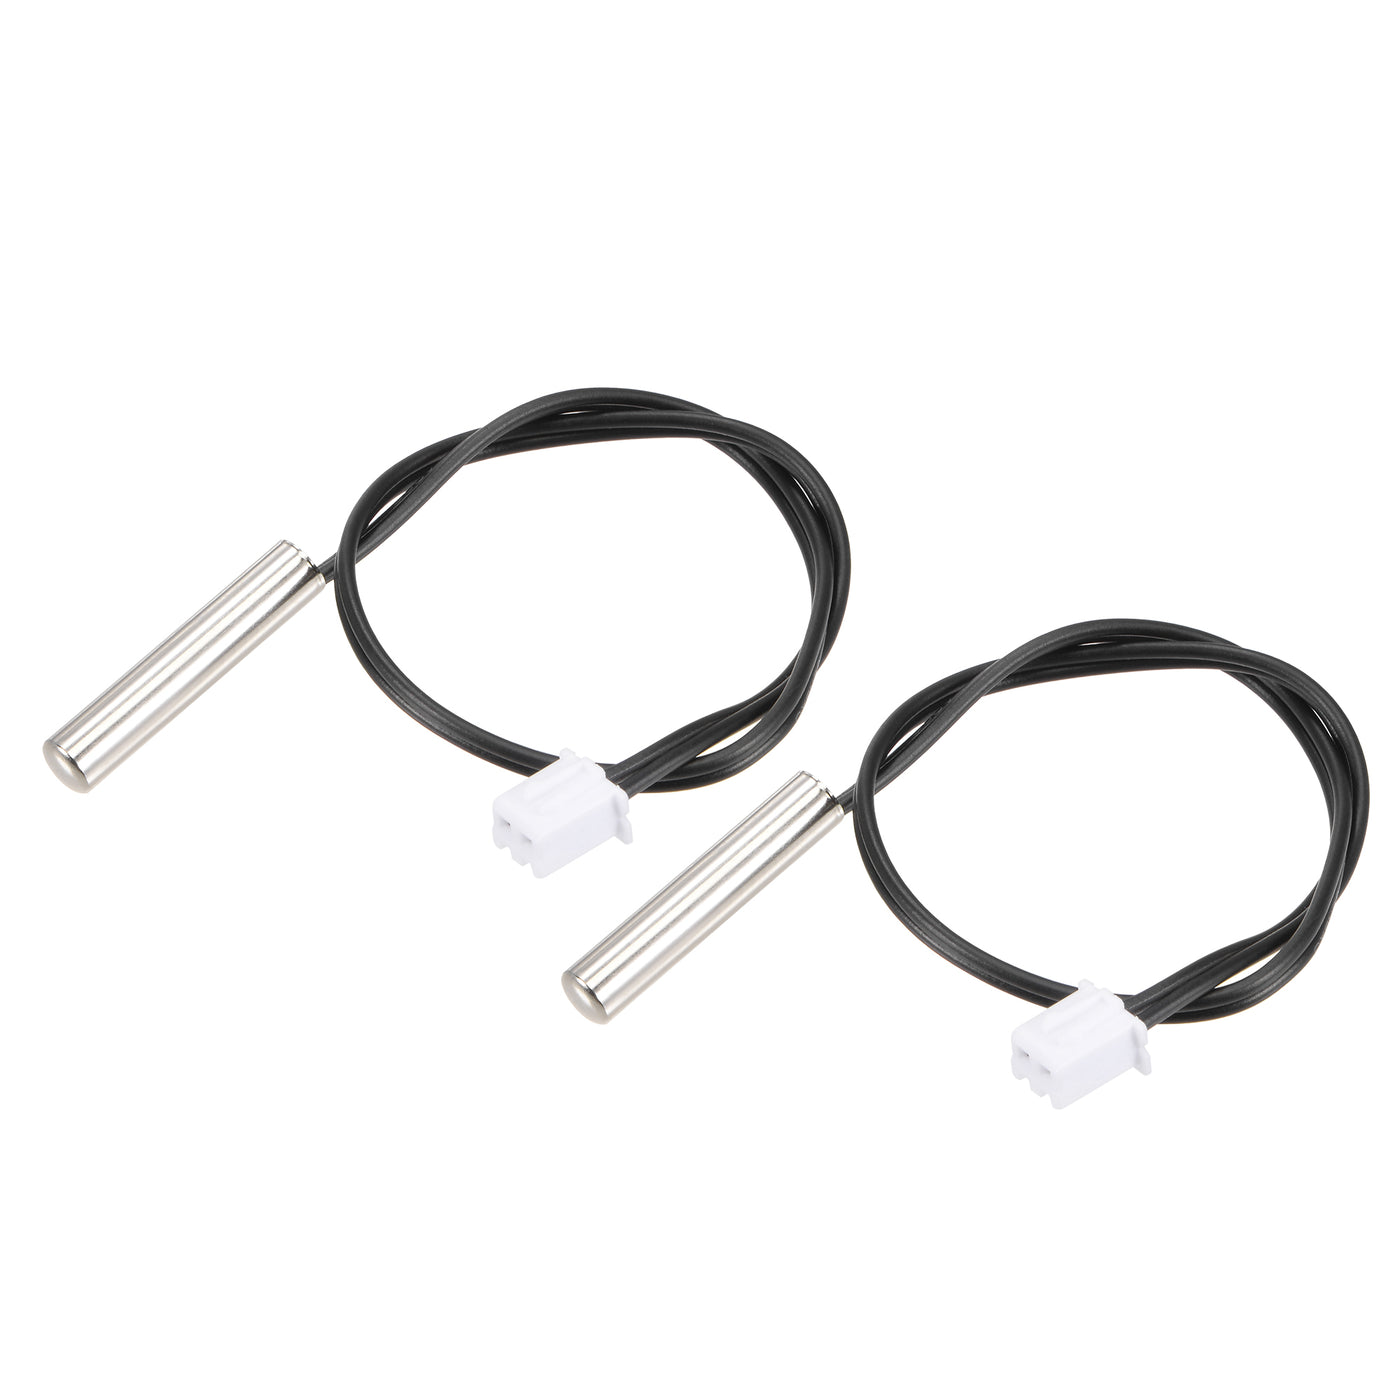 uxcell Uxcell 2pcs 15K Temperature Sensor Probe, Stainless Steel NTC Thermal Sensor Probe 20cm Digital Thermometer Extension Cable